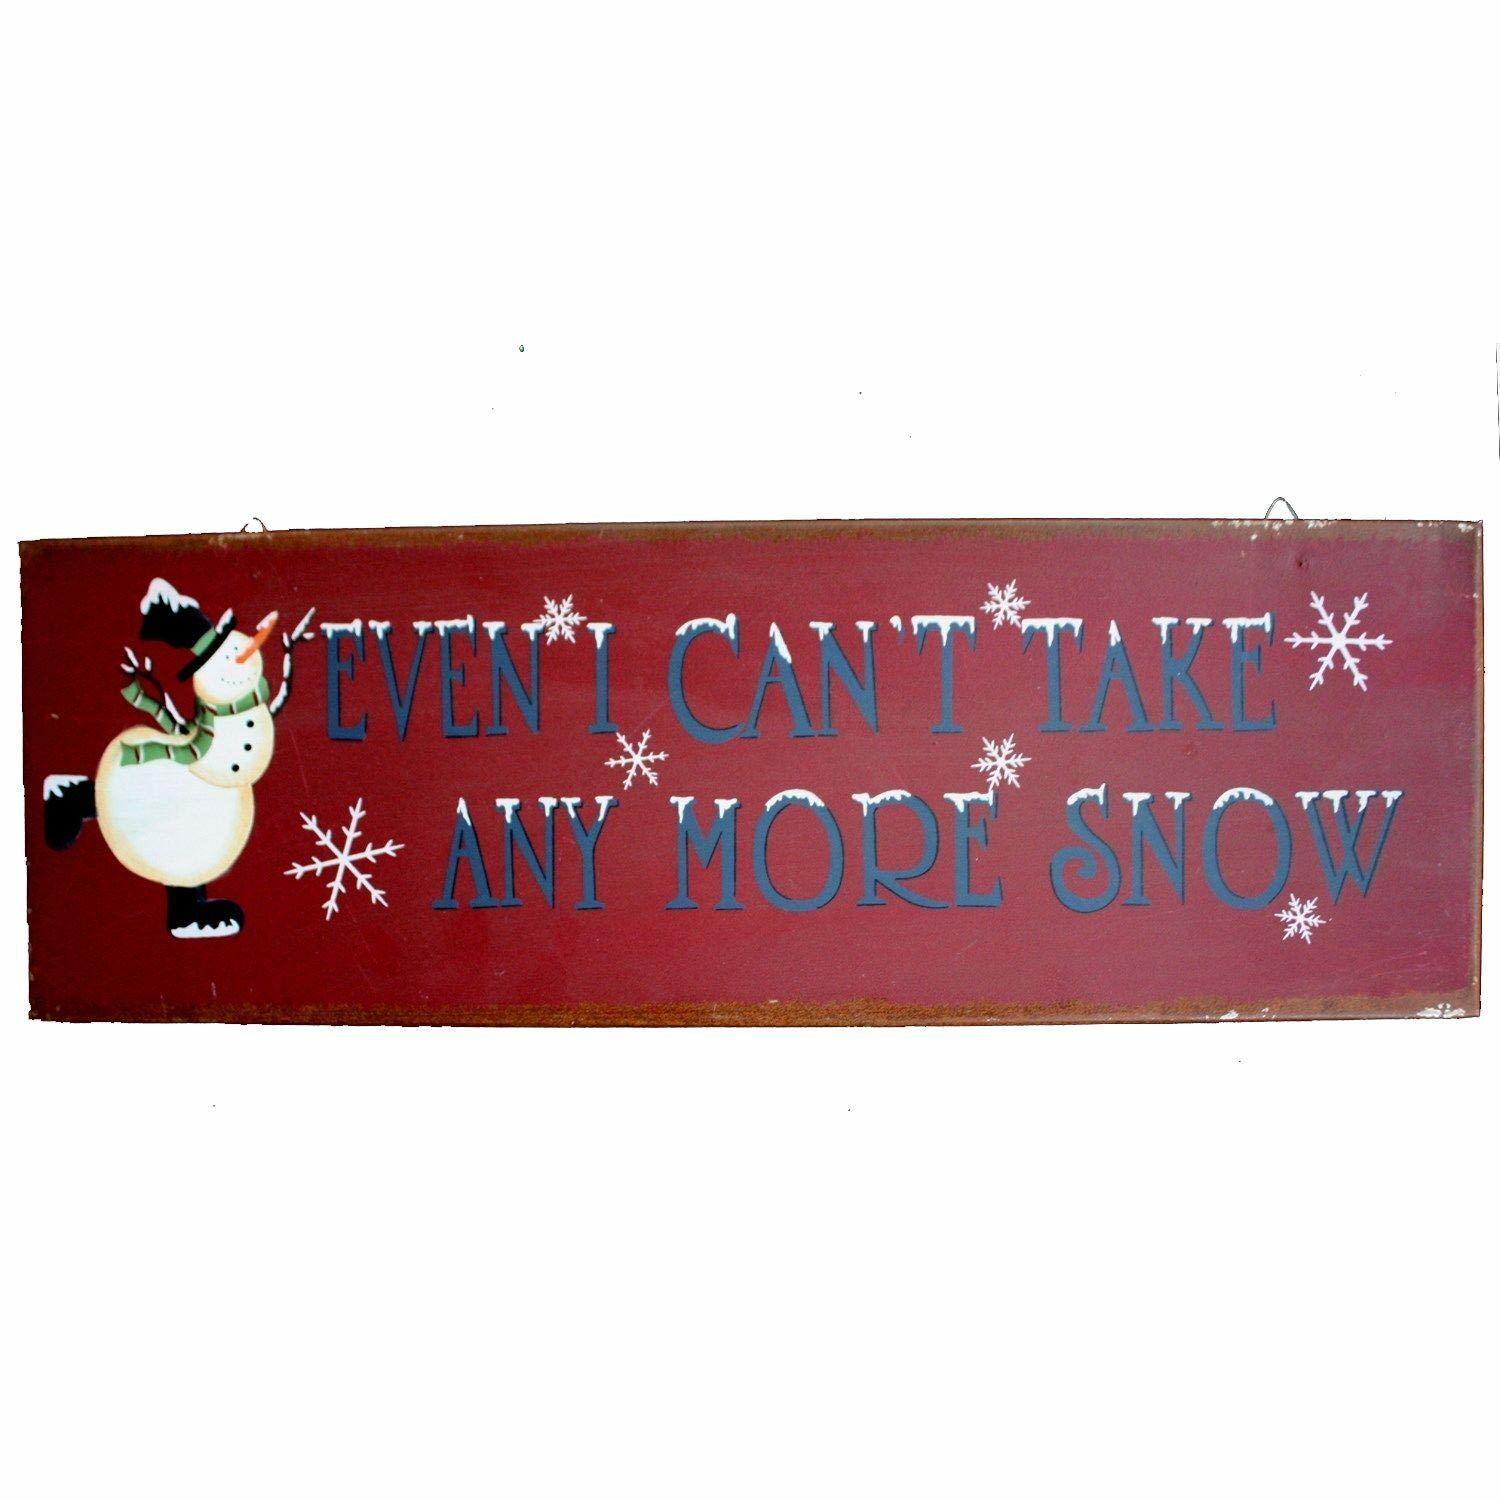 Primary image for Funny Snowman Sign-EVEN I CANT TAKE ANY MORE SNOW-Door Wall Christmas Decoration